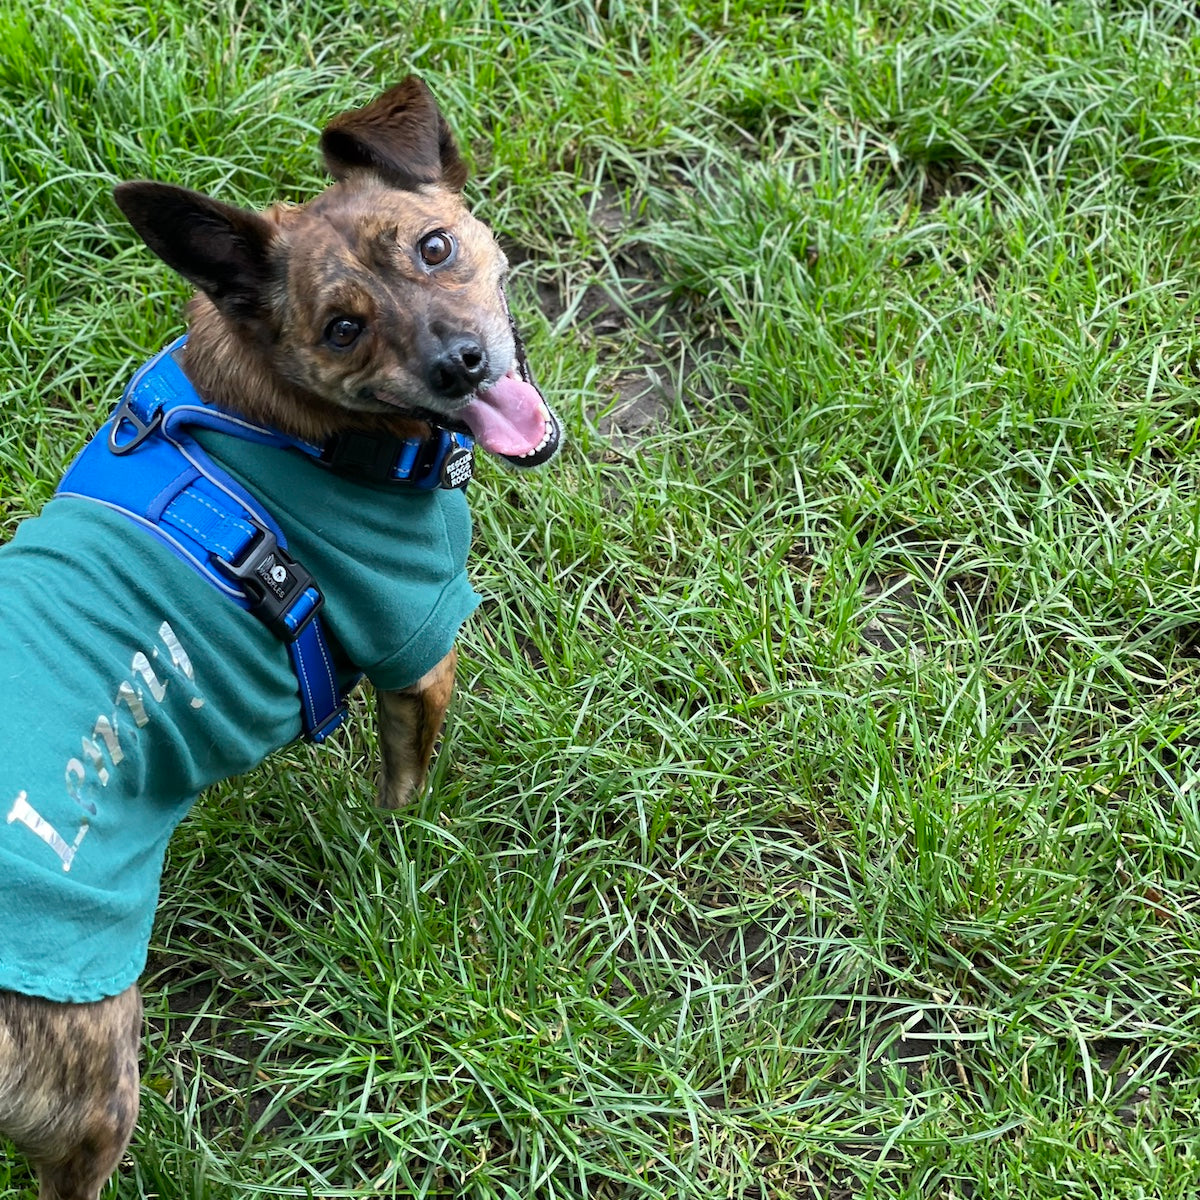 A small brindle dog wearing a green T-shirt and a blue harness. He's surrounded by grass and smiling at the camera.